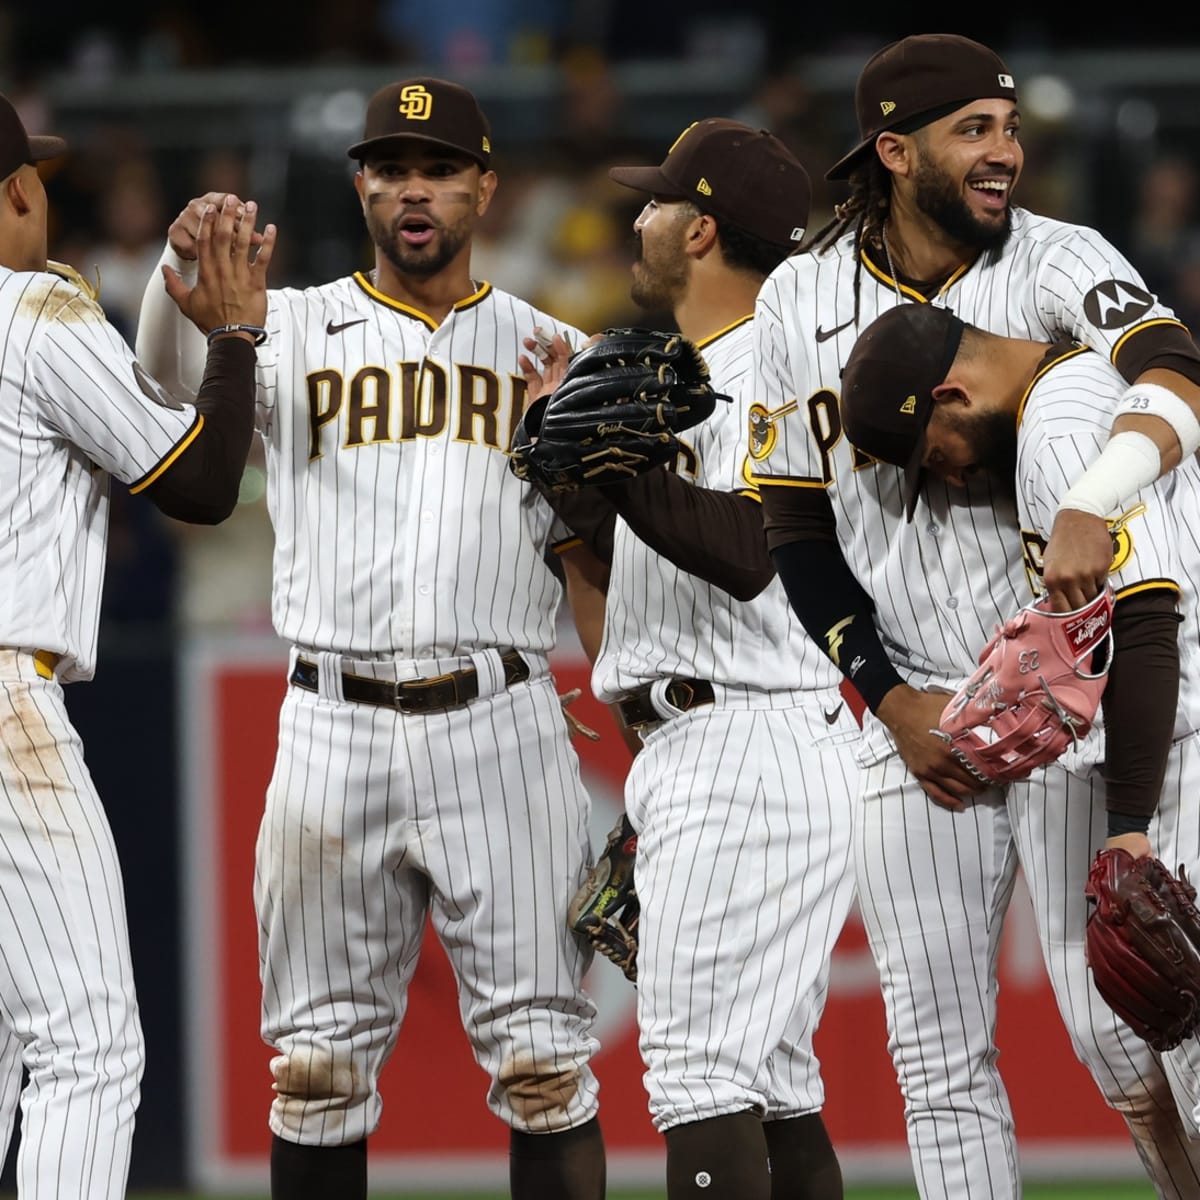 What incredible record do the Padres need to reach the MLB